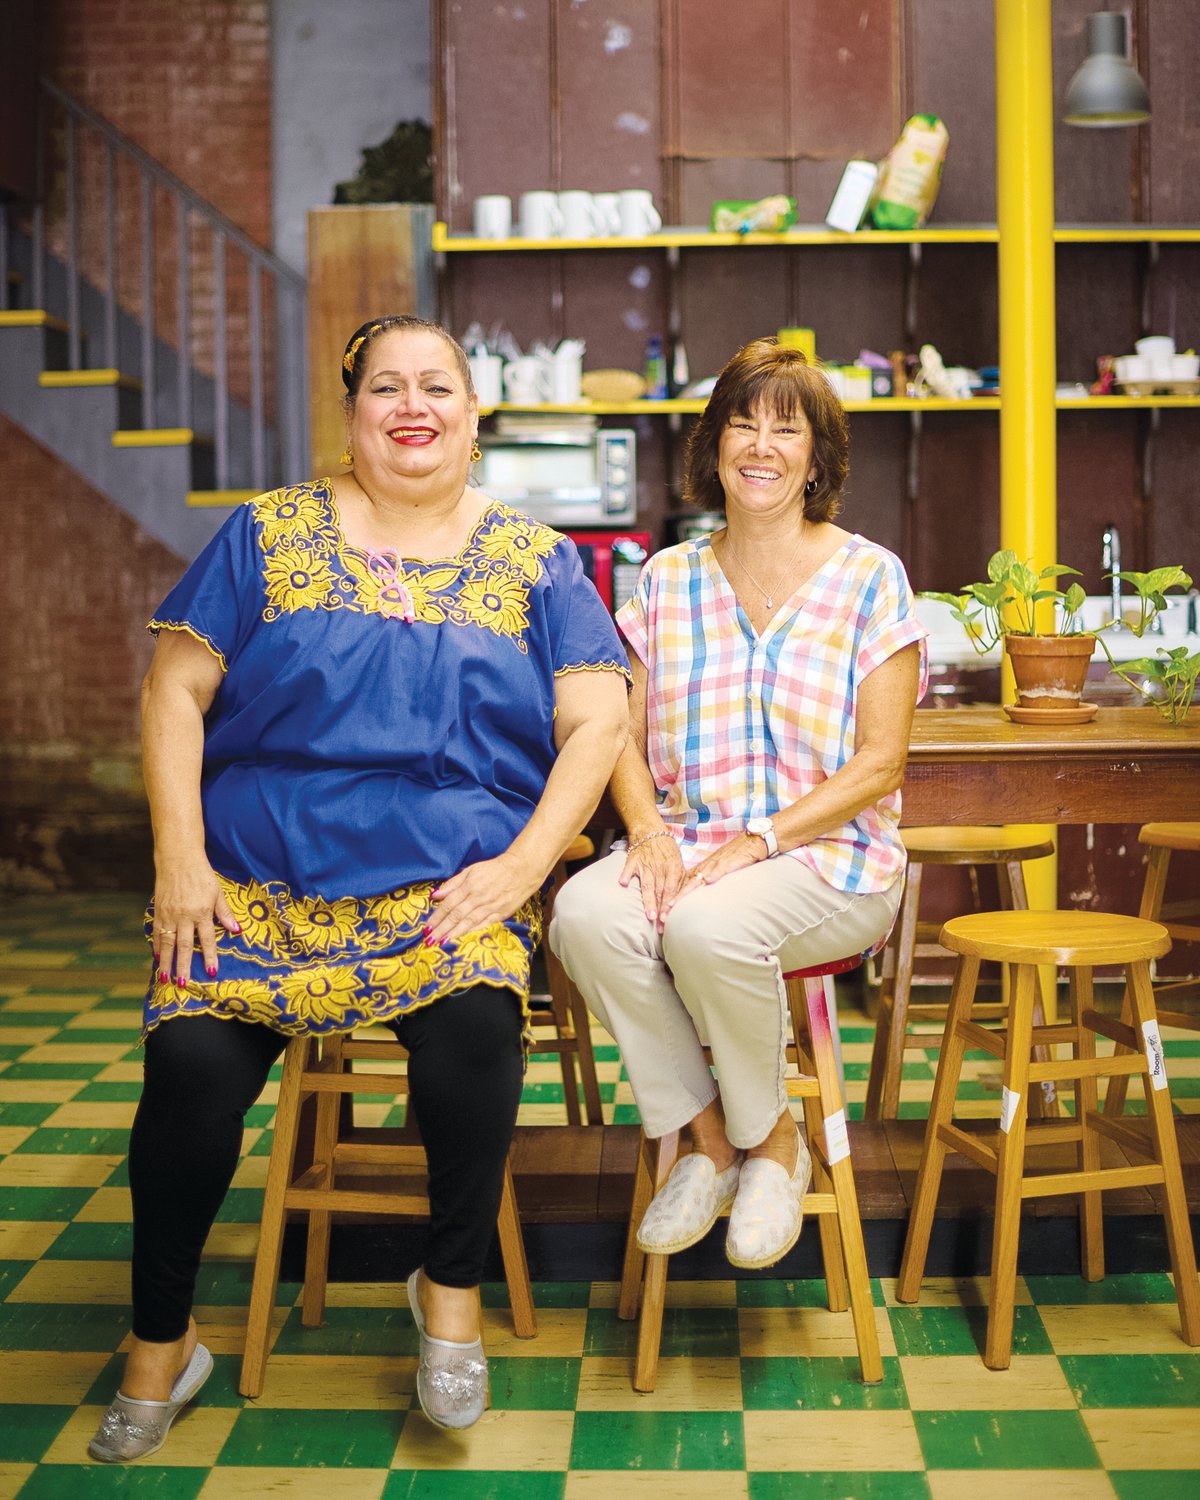 The Hispanic Liaison's Elena González, 62, sits with her Chatham Literacy tutor, Patty Poe (right), inside The Alliance in downtown Siler City. González gathers there most Wednesday mornings for about two hours to improve her English with Poe.